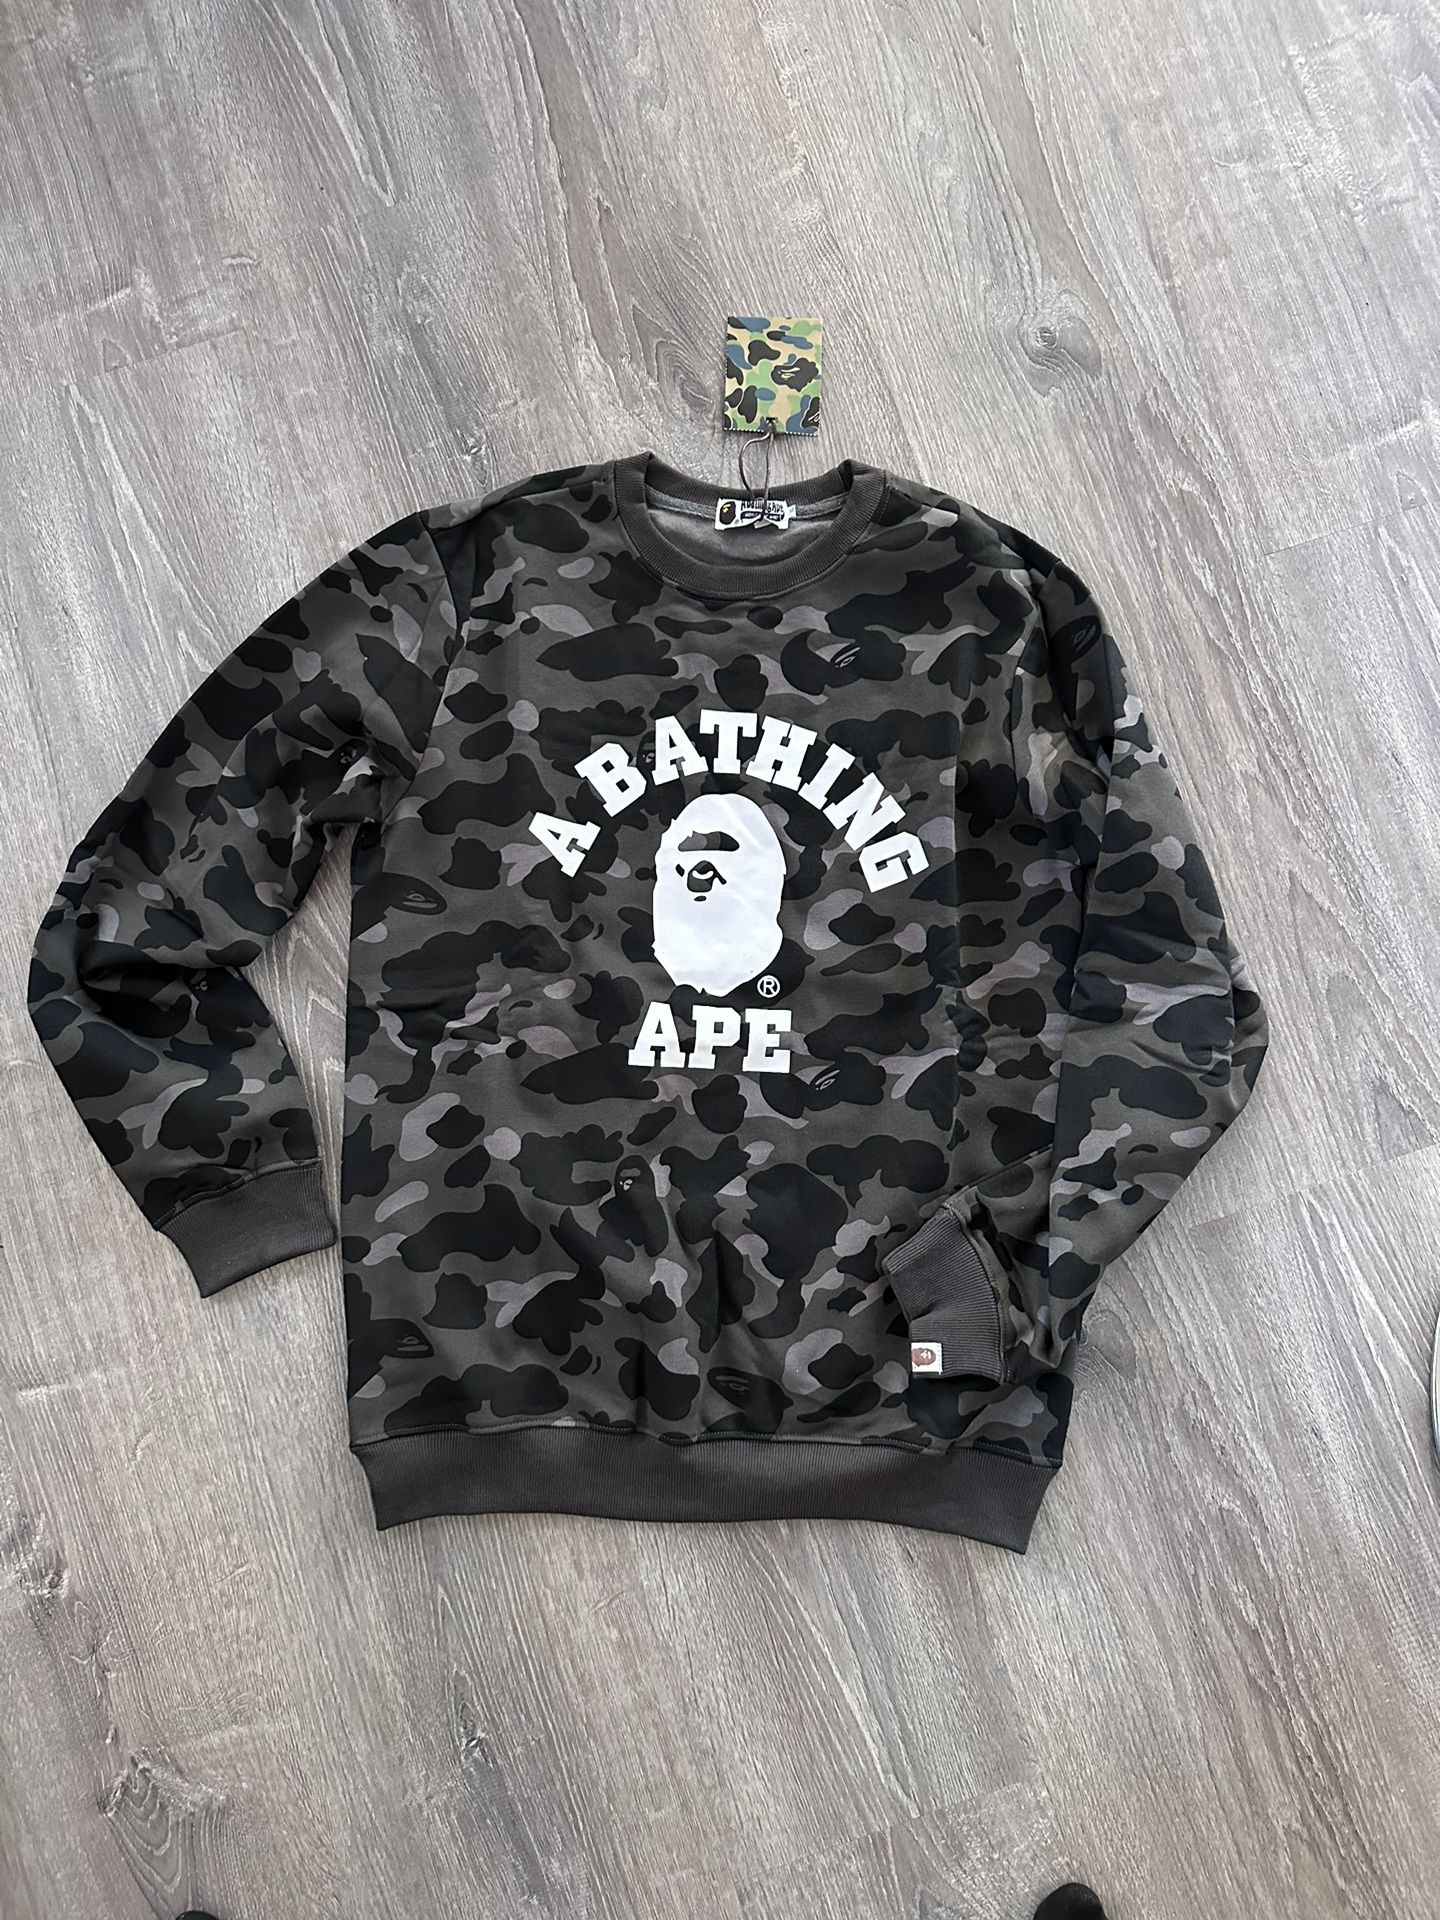 BAPE Sweatshirt New With Bags and Tags